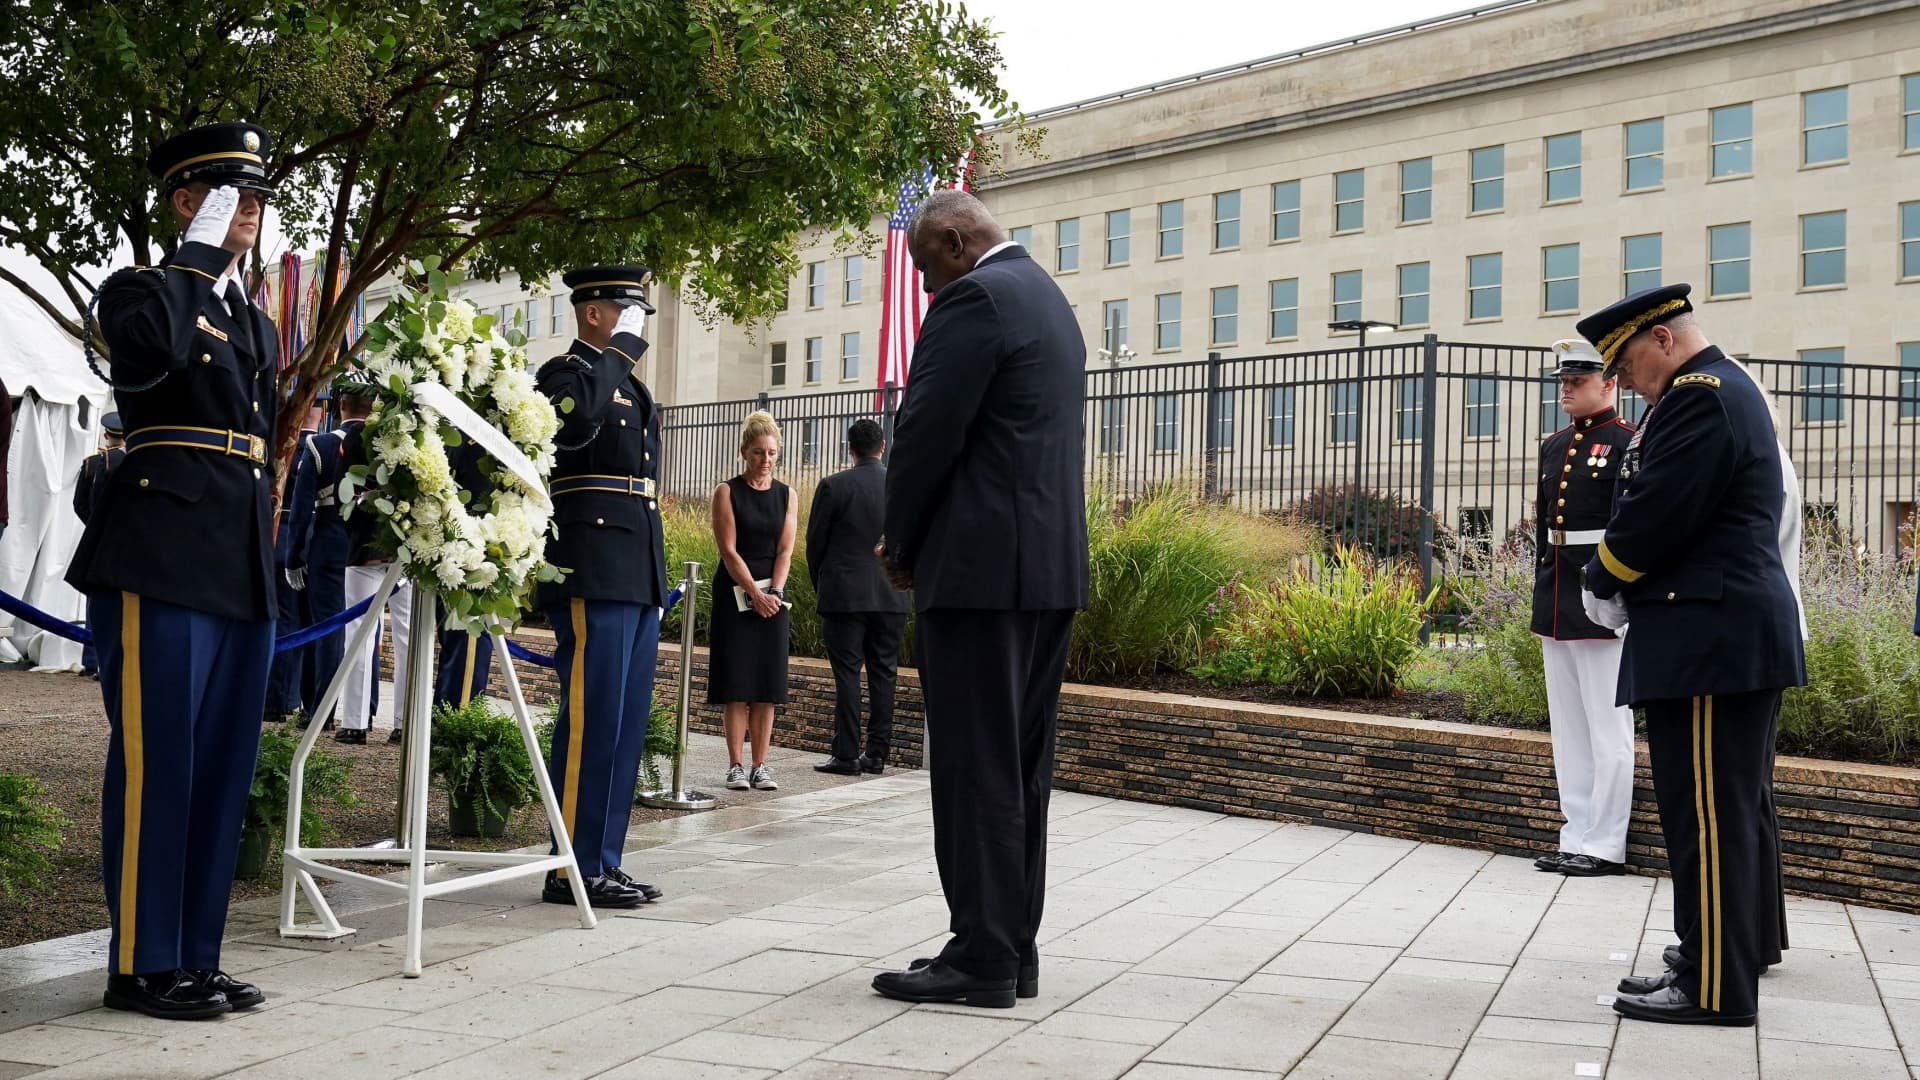 U.S. Secretary of Defense Lloyd J. Austin III lays a wreath during a ceremony to mark the 22nd anniversary of the Sept. 11, 2001, terrorist attacks, at the Pentagon, Sept. 11, 2023.